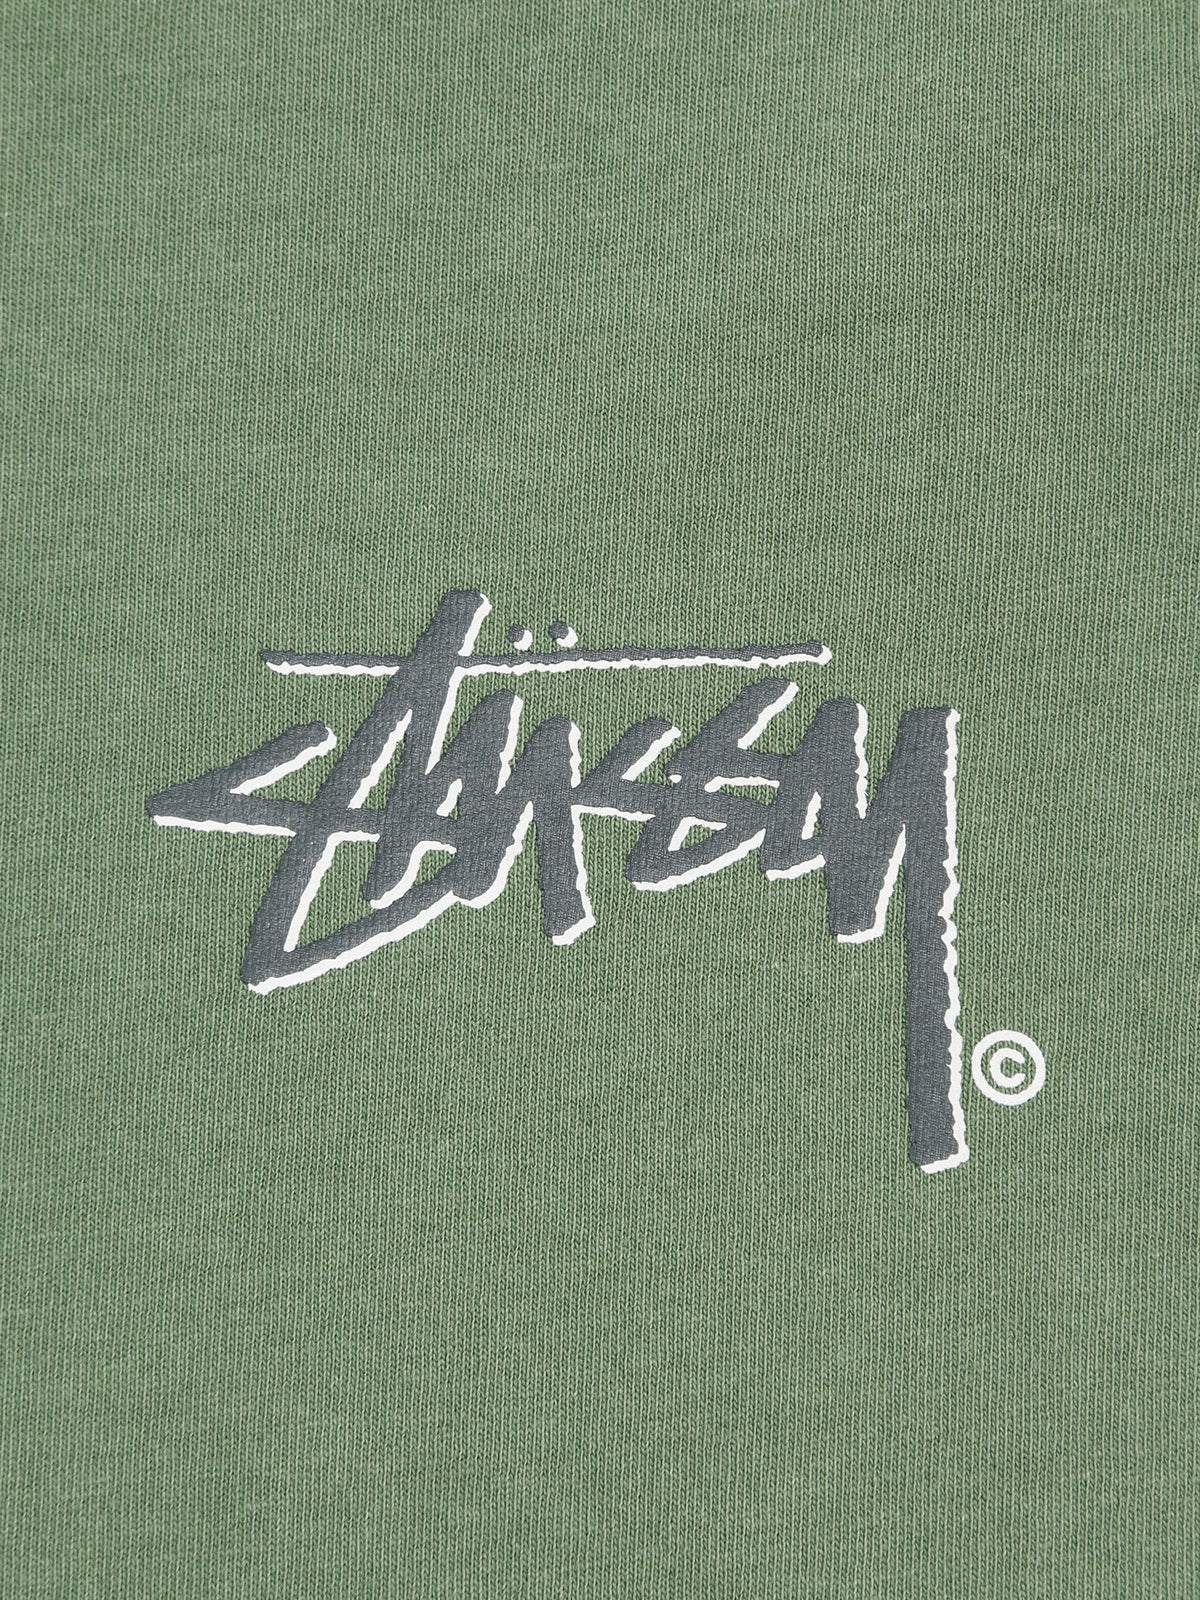 Shadow Stock T-Shirt in Pigment Basil